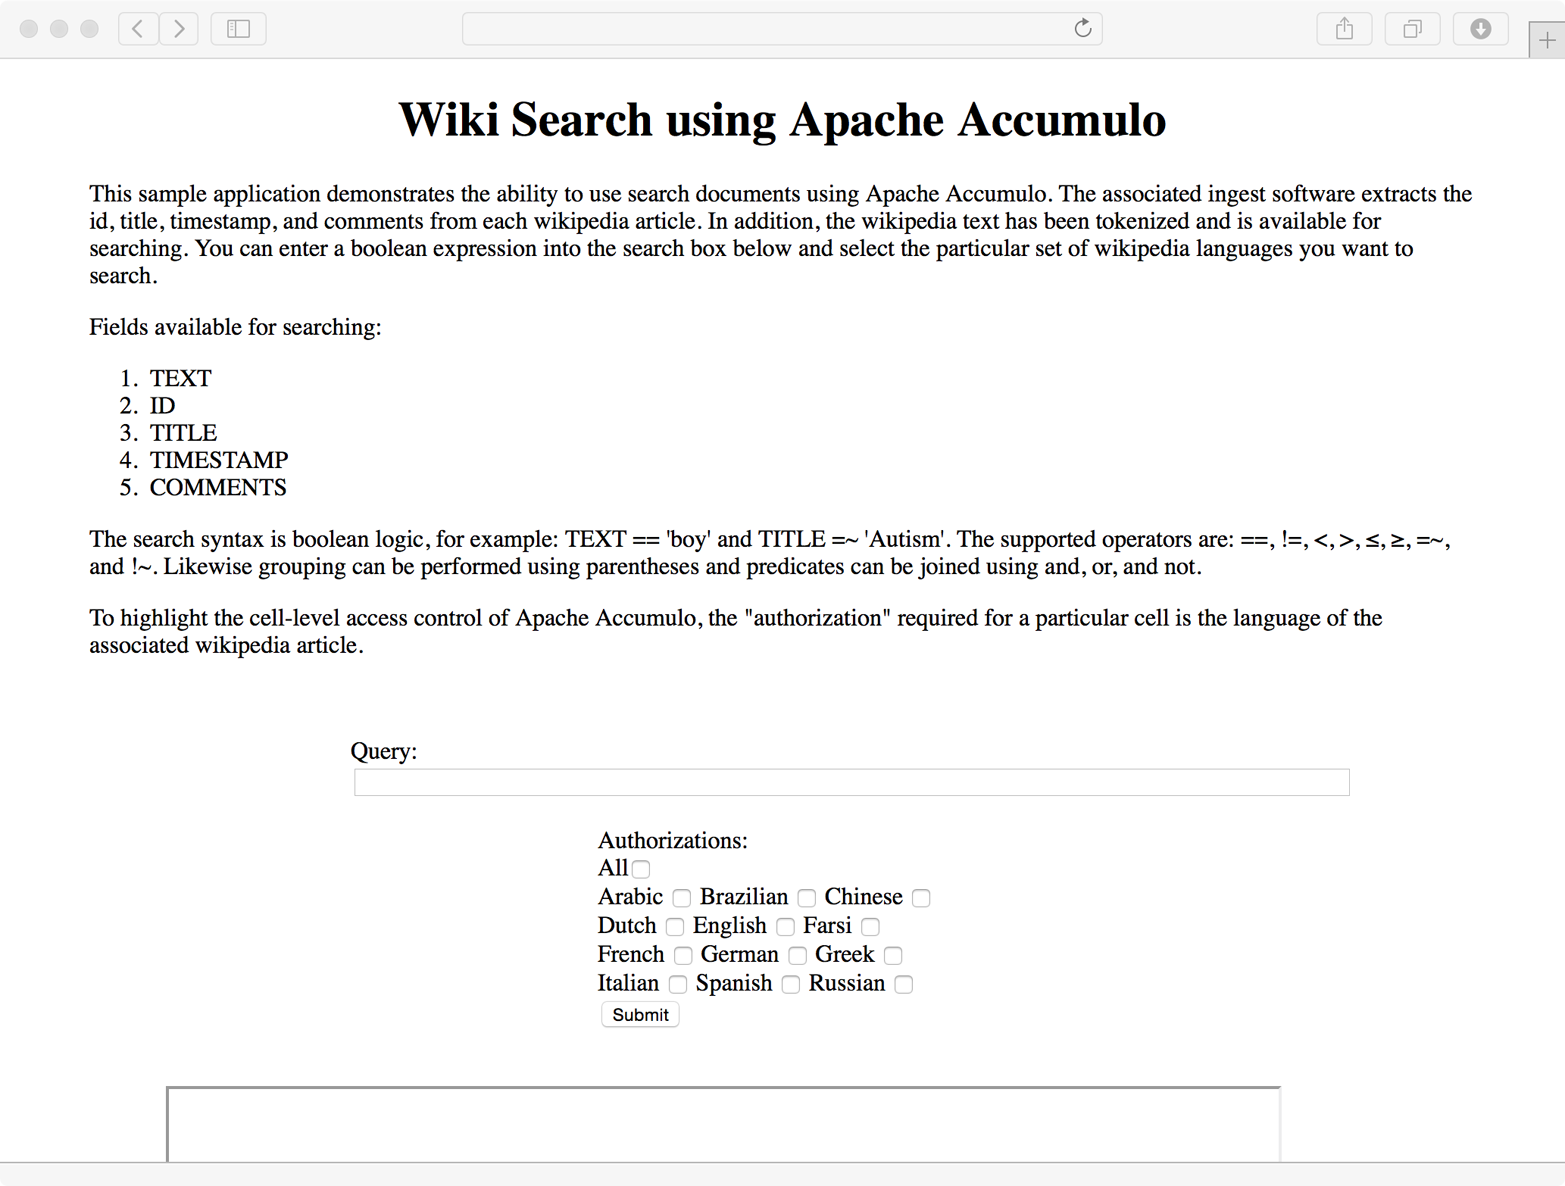 The Wikisearch UI